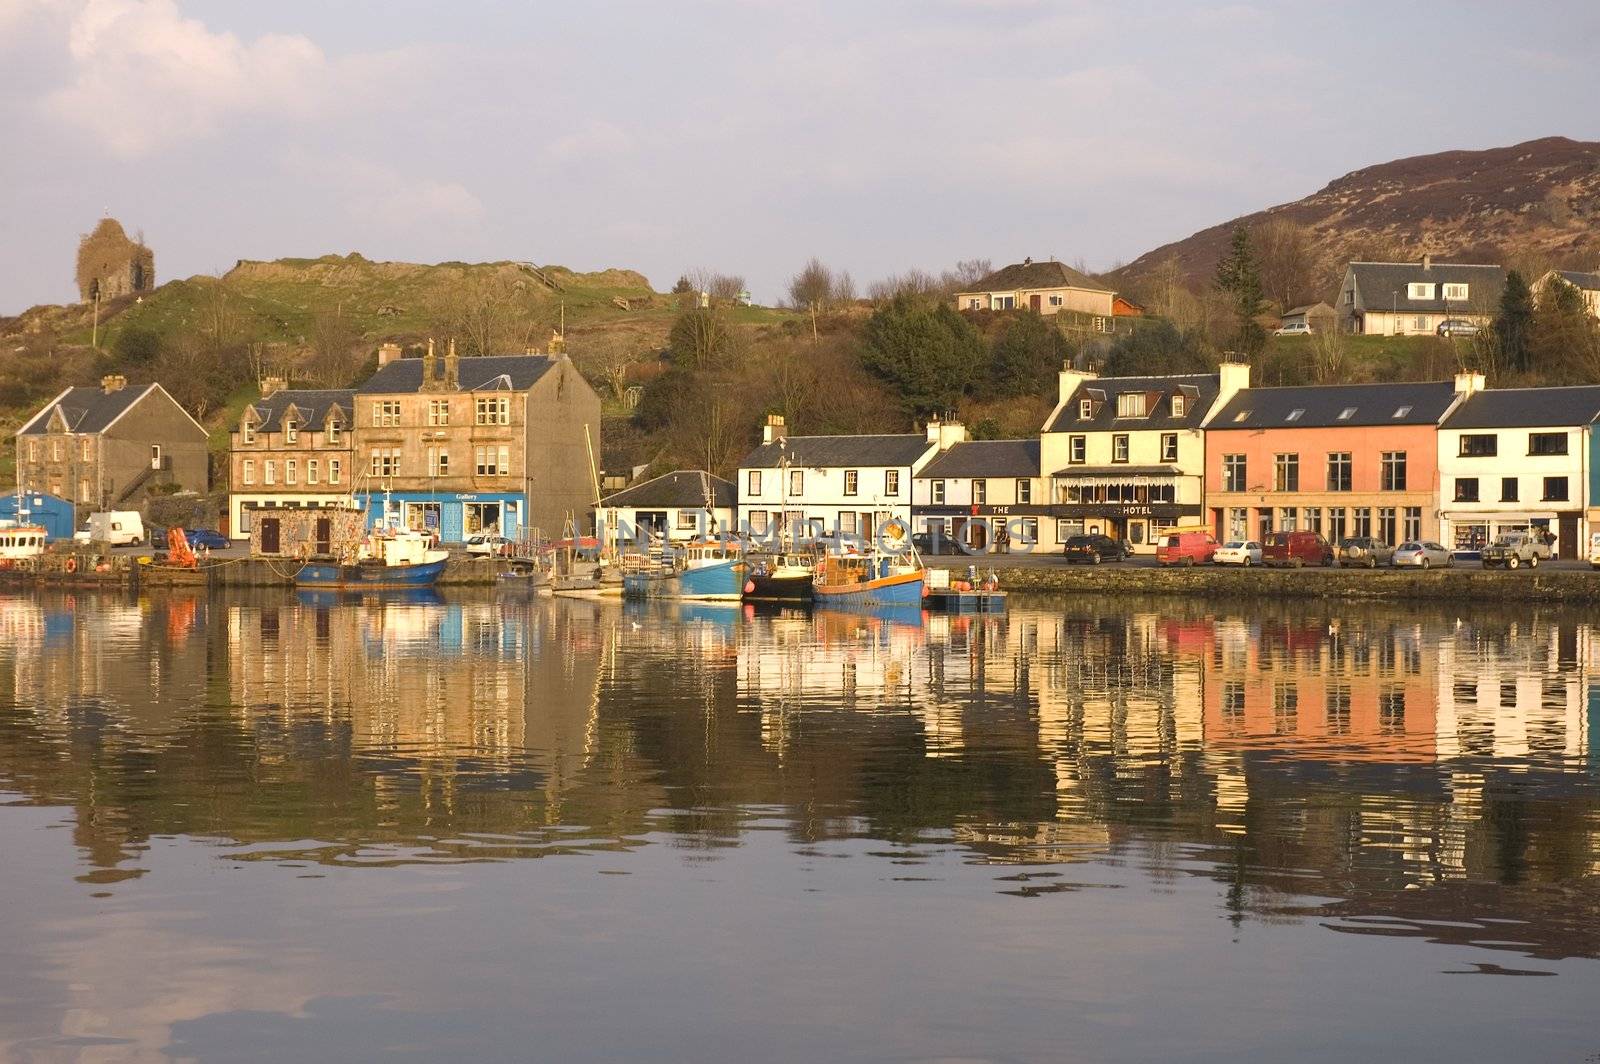 Tarbert Harbor, Tarbert castle  & waterfront reflected in the Loch at sunset